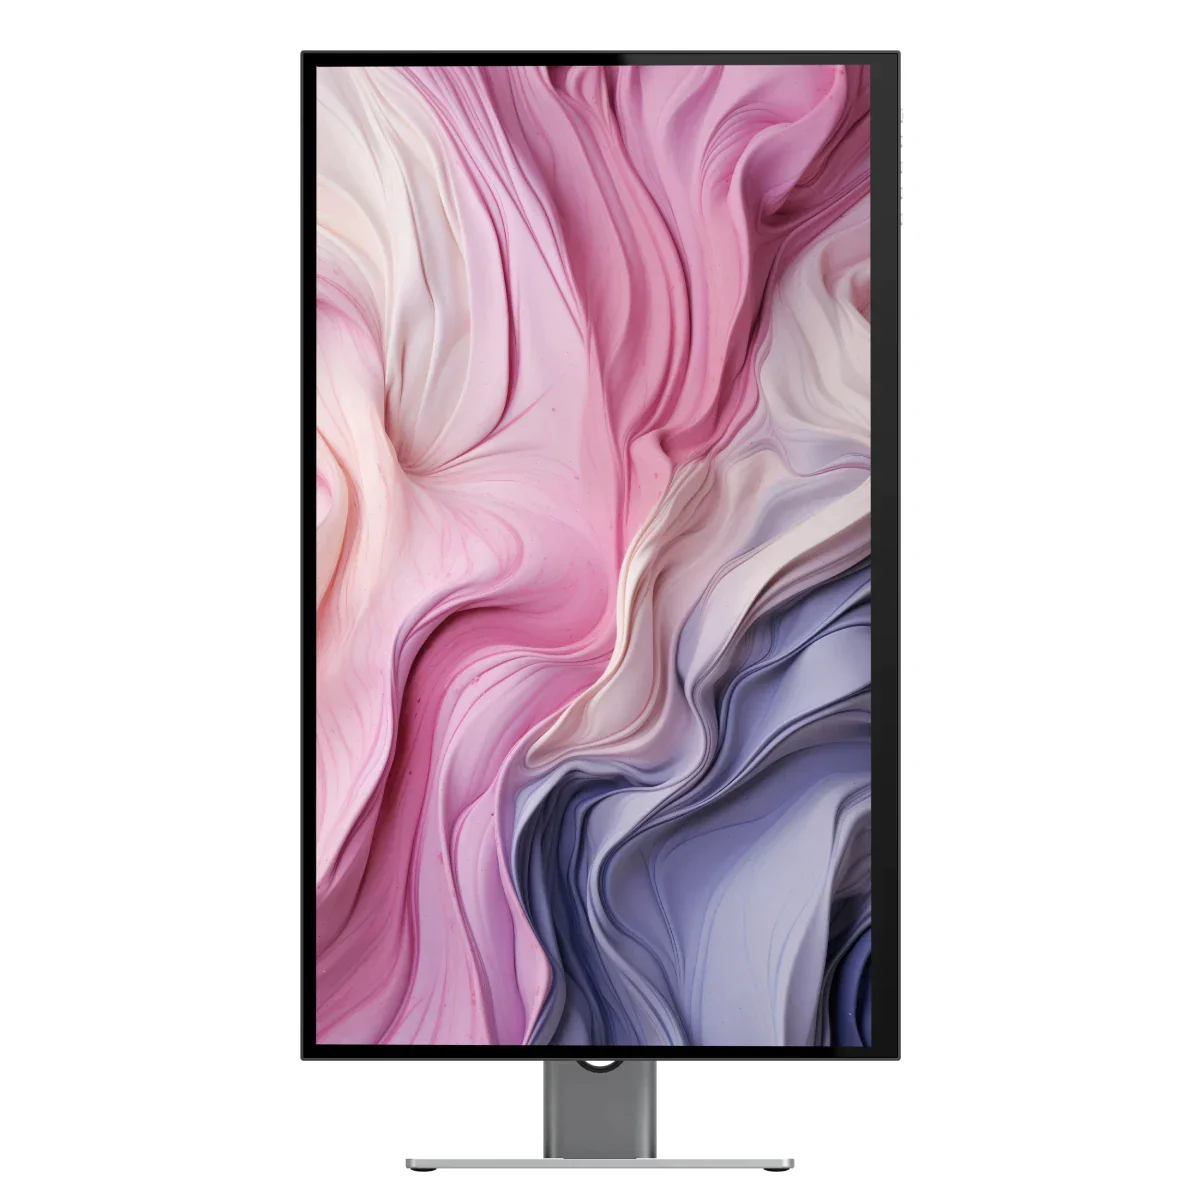 CLARITY 27" UHD 4K Monitor + Clarity Pro Touch 27" UHD 4K Monitor with 65W PD, Webcam and Touchscreen + DX2 Dual 4K Display Universal Docking Station with 65W Power Delivery